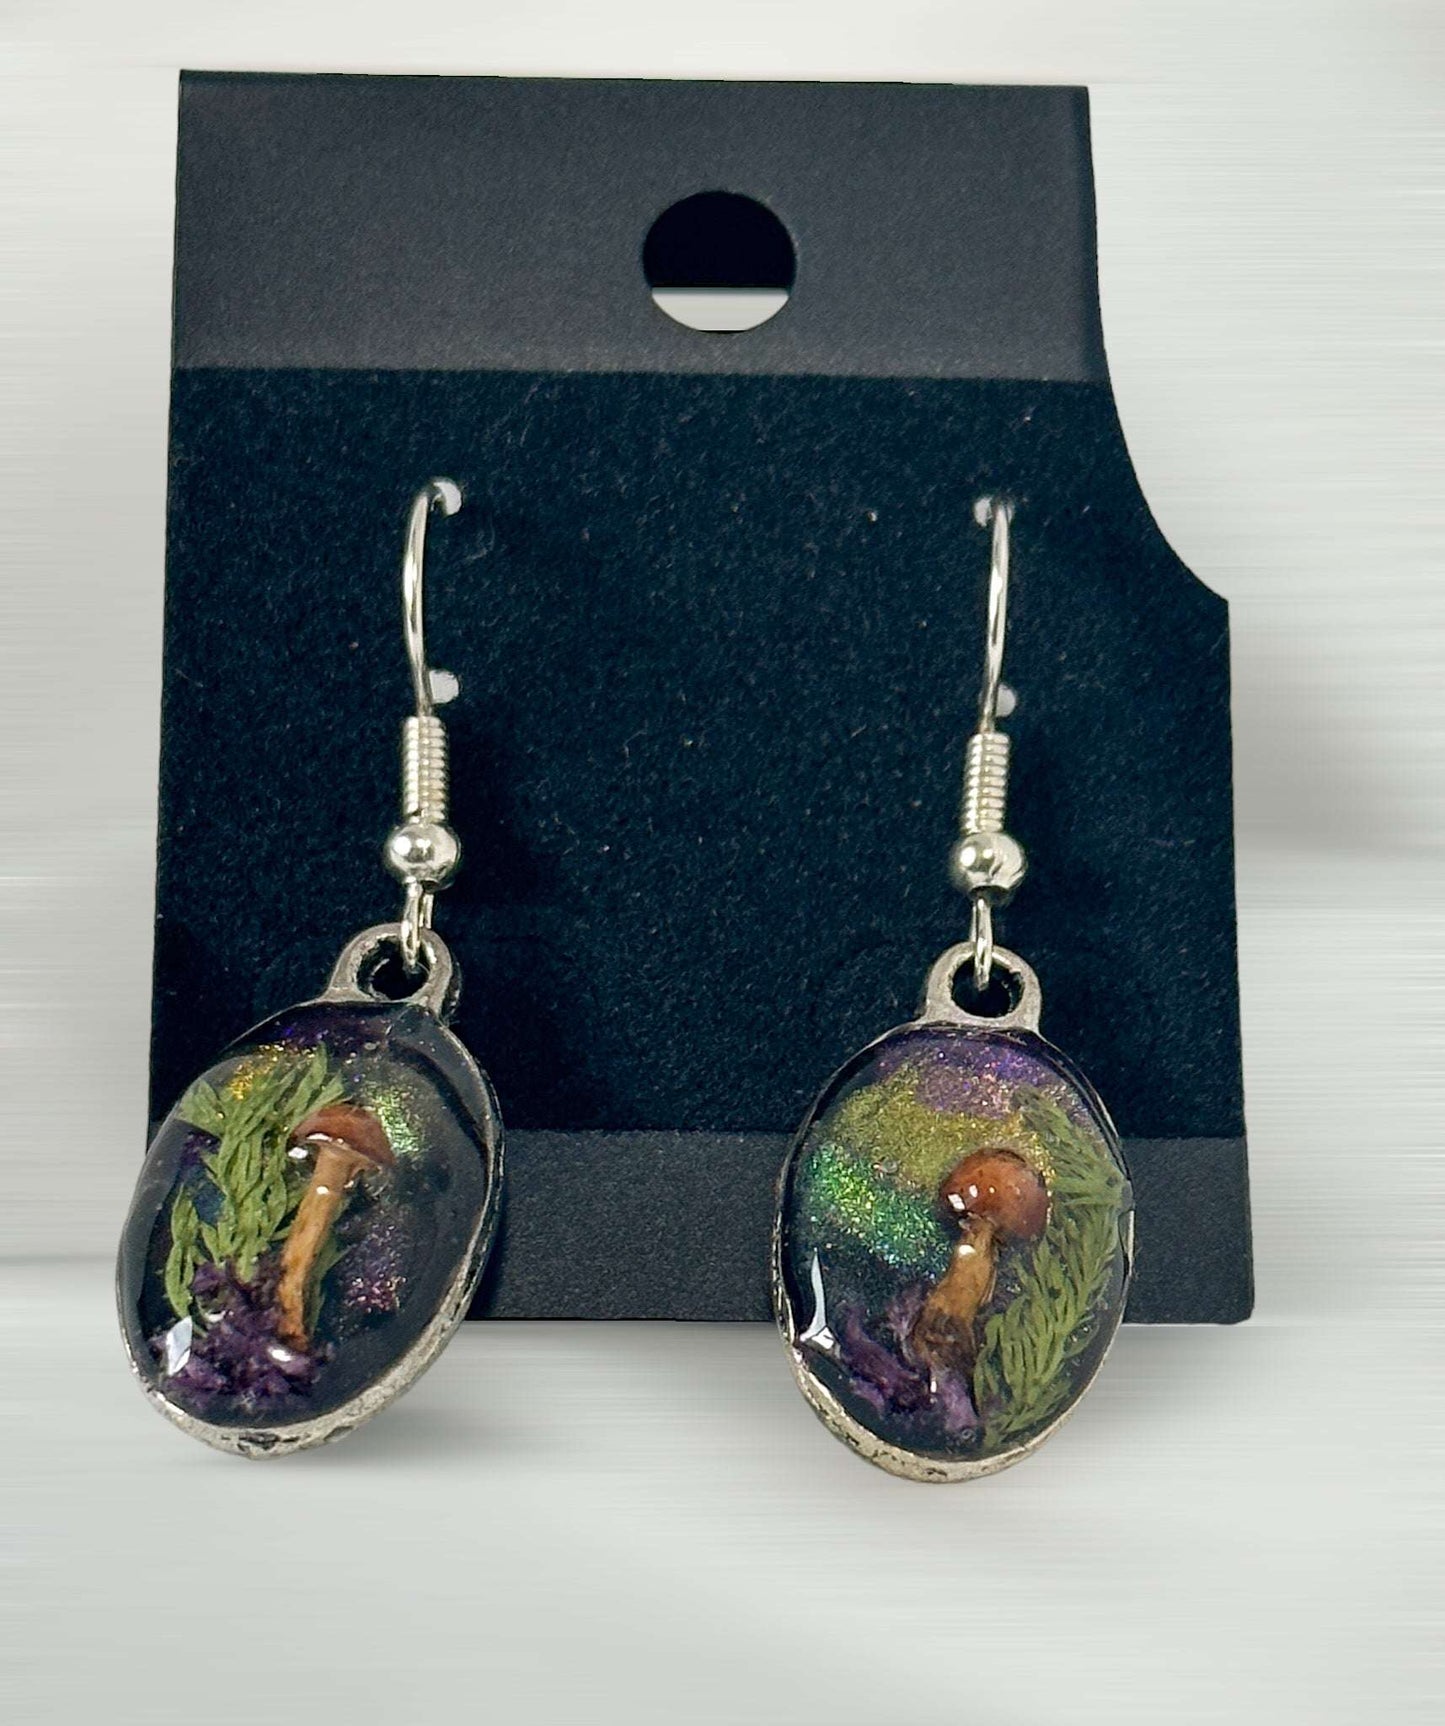 Mushroom Forest: Whimsical Drop Earring Set with Dried Botanicals